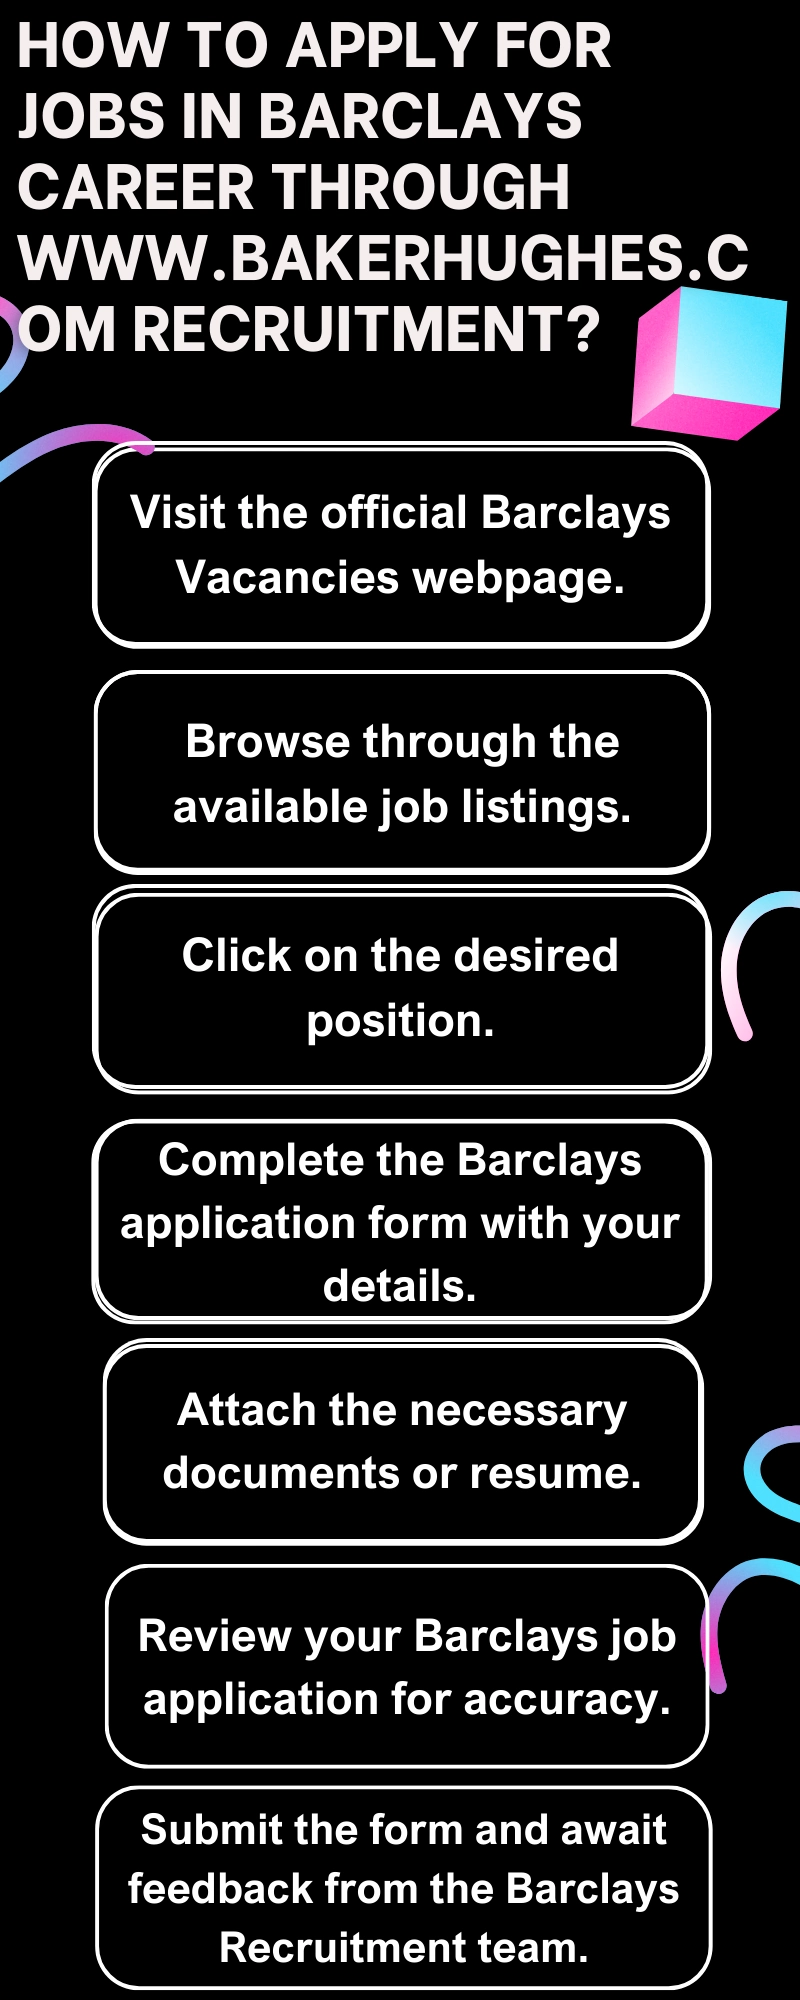 How to Apply for Jobs in Barclays Career through www.bakerhughes.com recruitment?